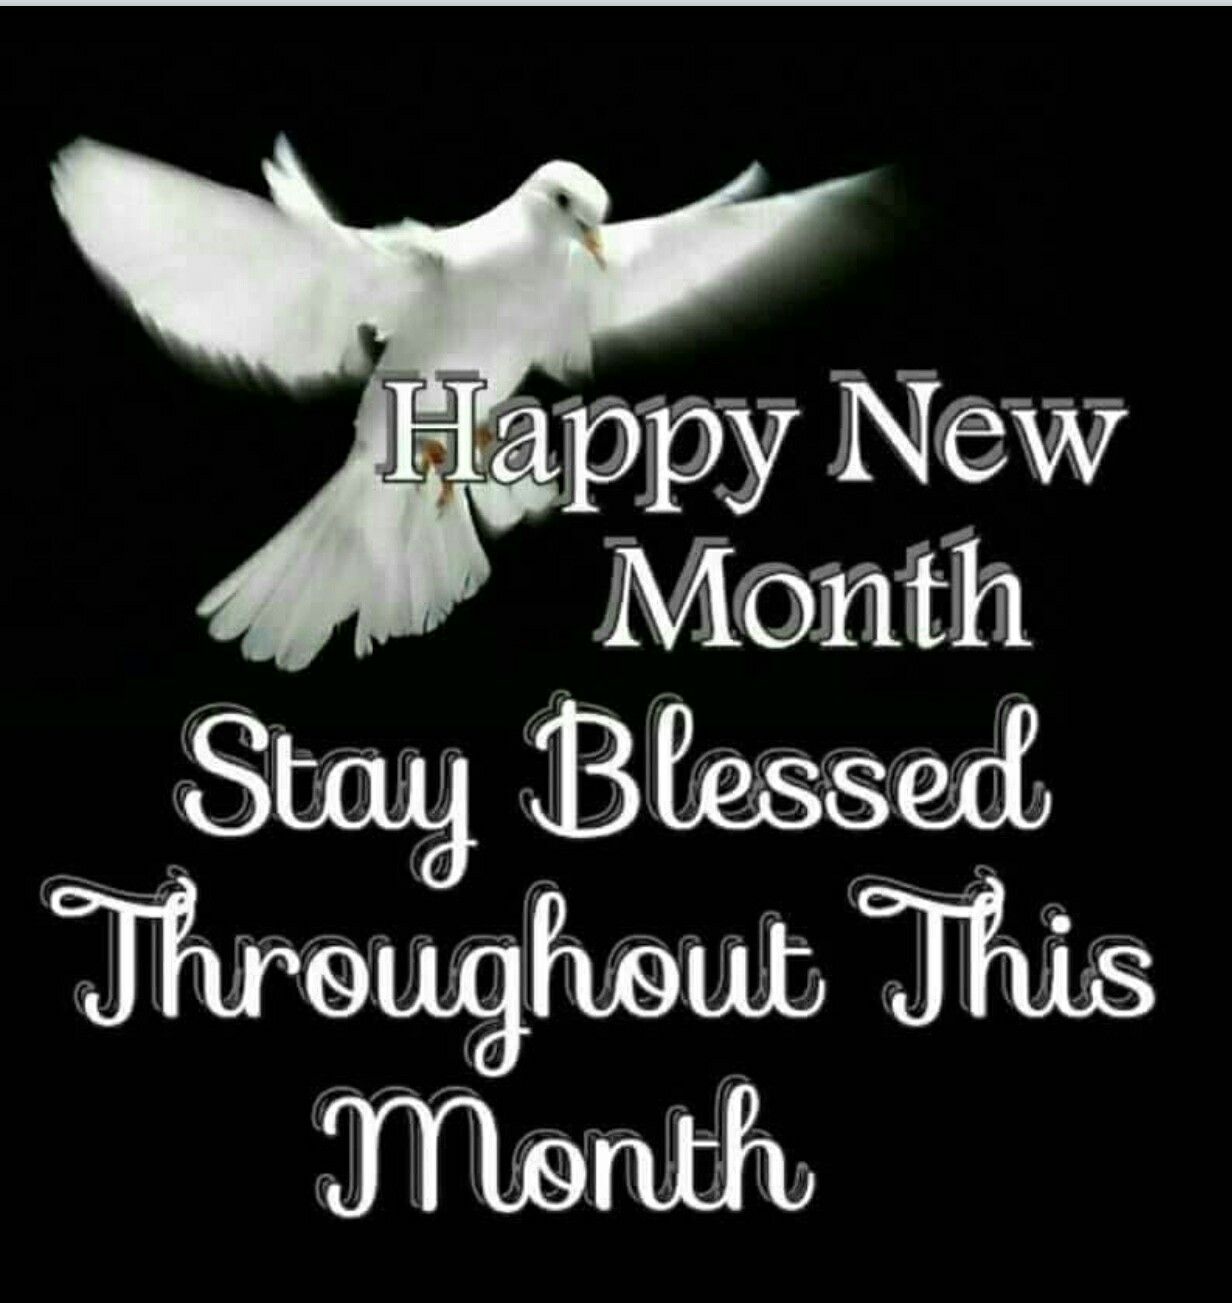 HAPPY NEW MONTH! ideas. new month, happy new, new month wishes